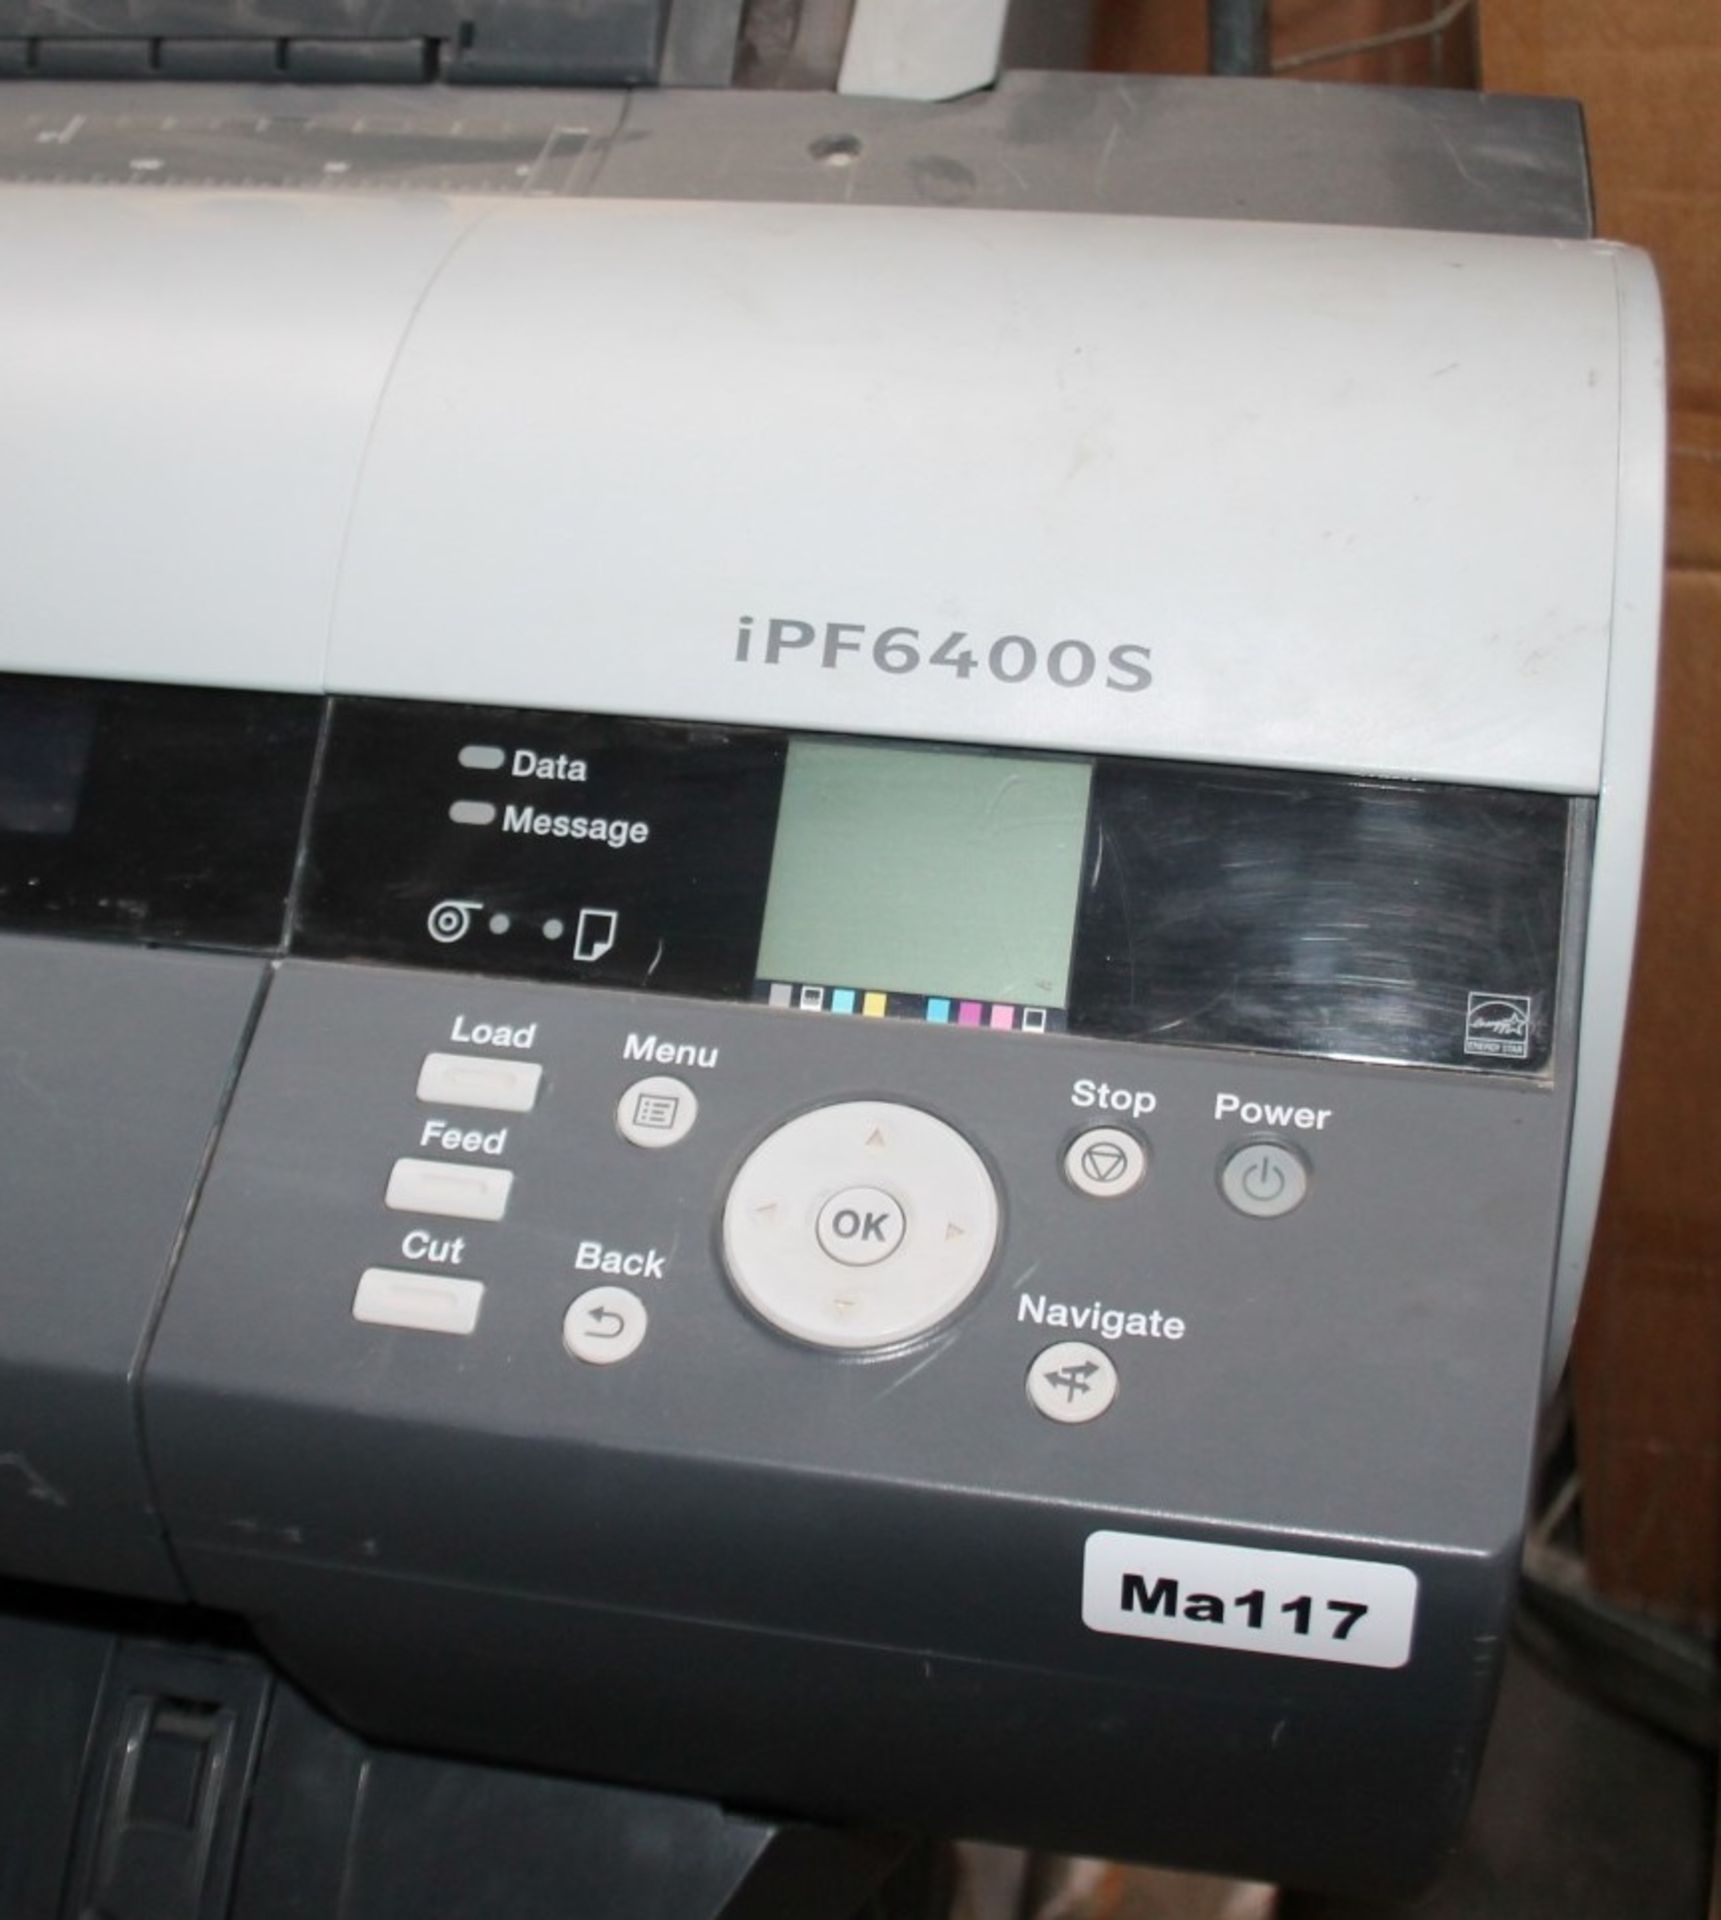 1 x Canon imagePROGRAF iPF6400 Printer Proofer - Pre-owned - Ref: Ma117 GIT - CL011 - Location: - Image 3 of 8